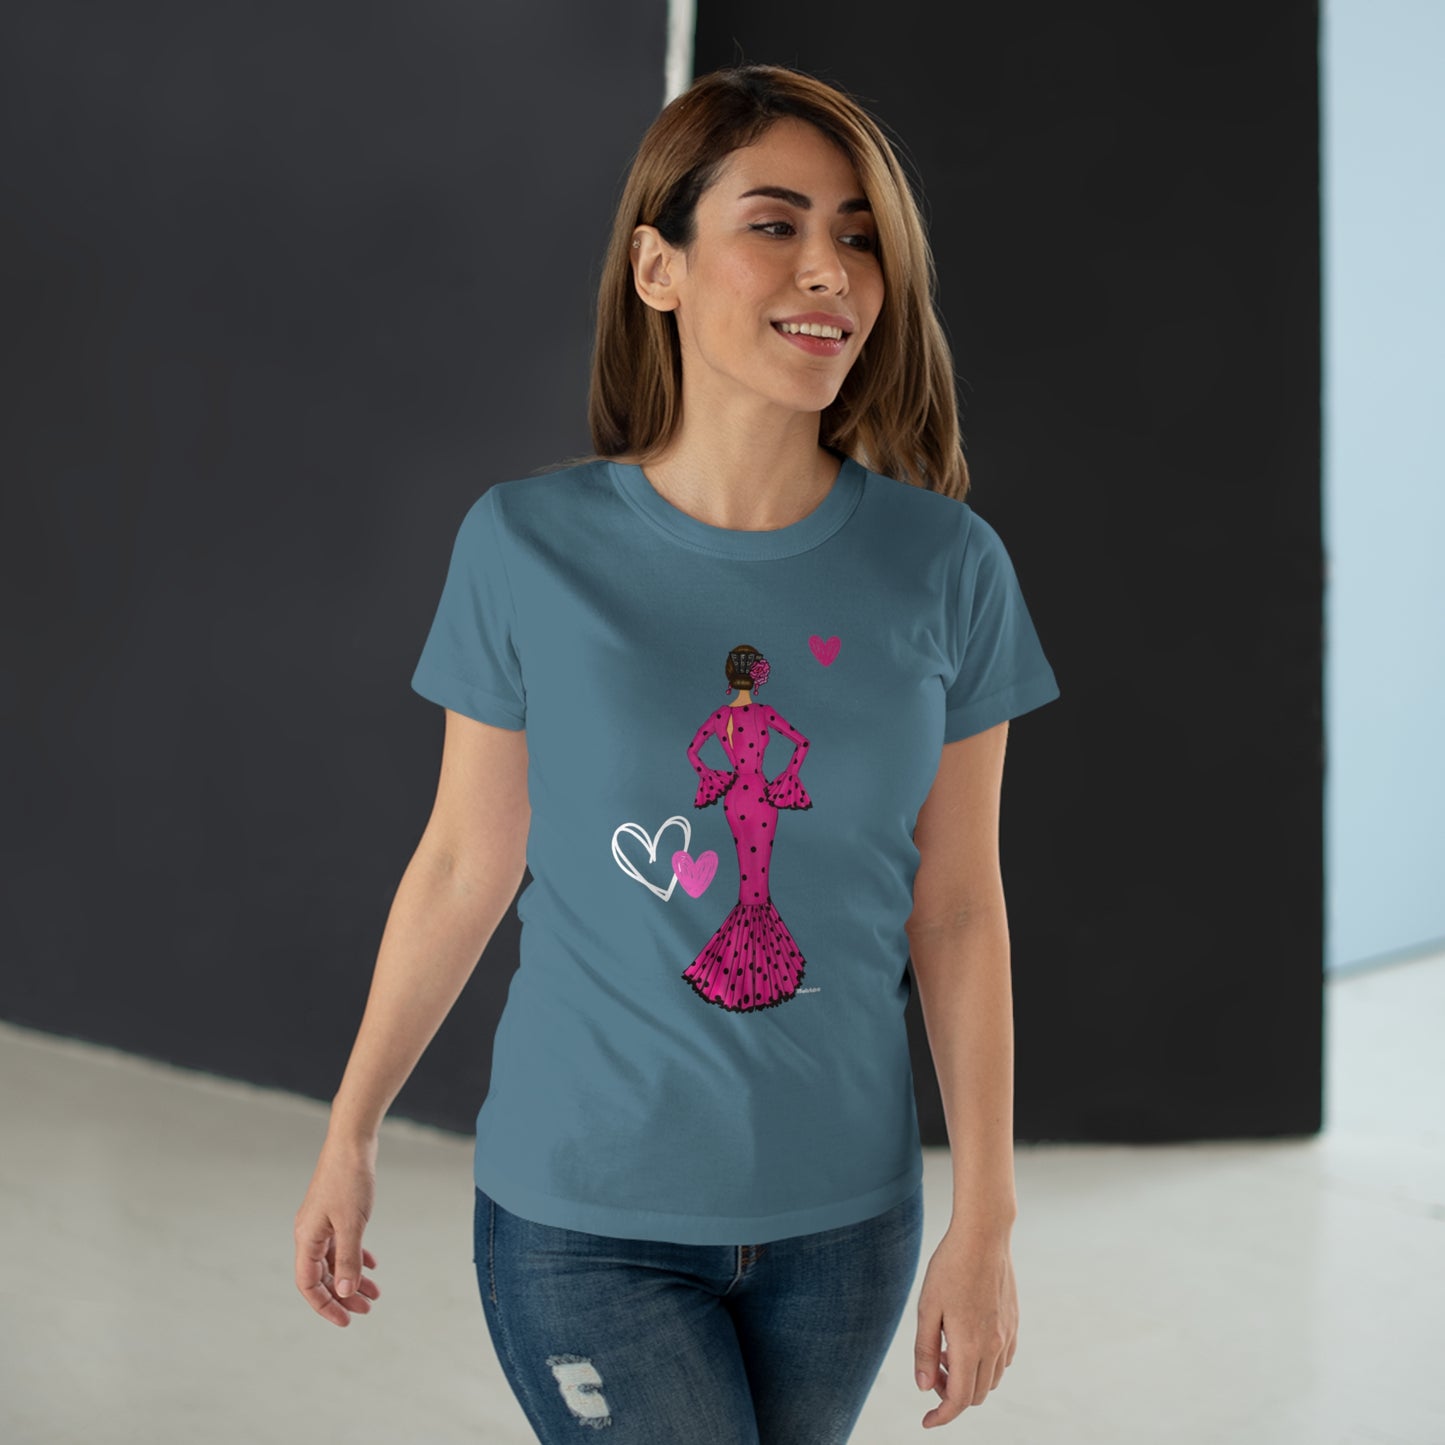 a woman wearing a blue t - shirt with a pink design on it